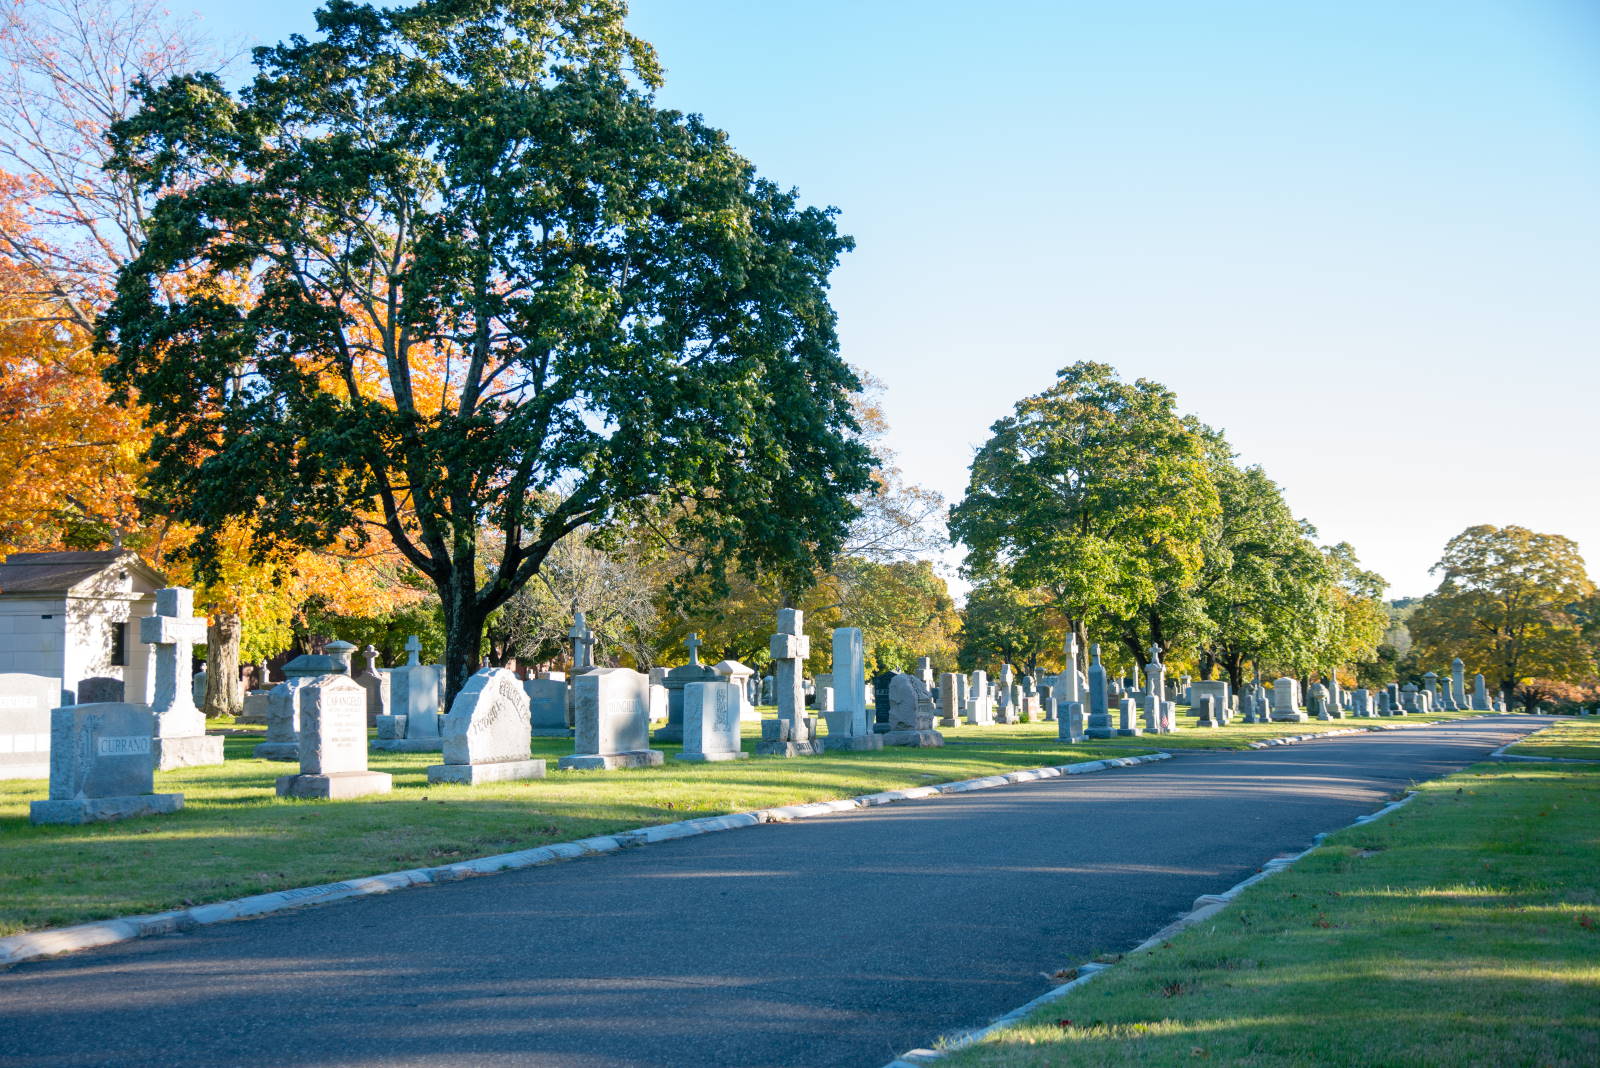 Exterior Photo of Saint Lawrence Cemetery
280 Derby Ave
West Haven, CT 06516